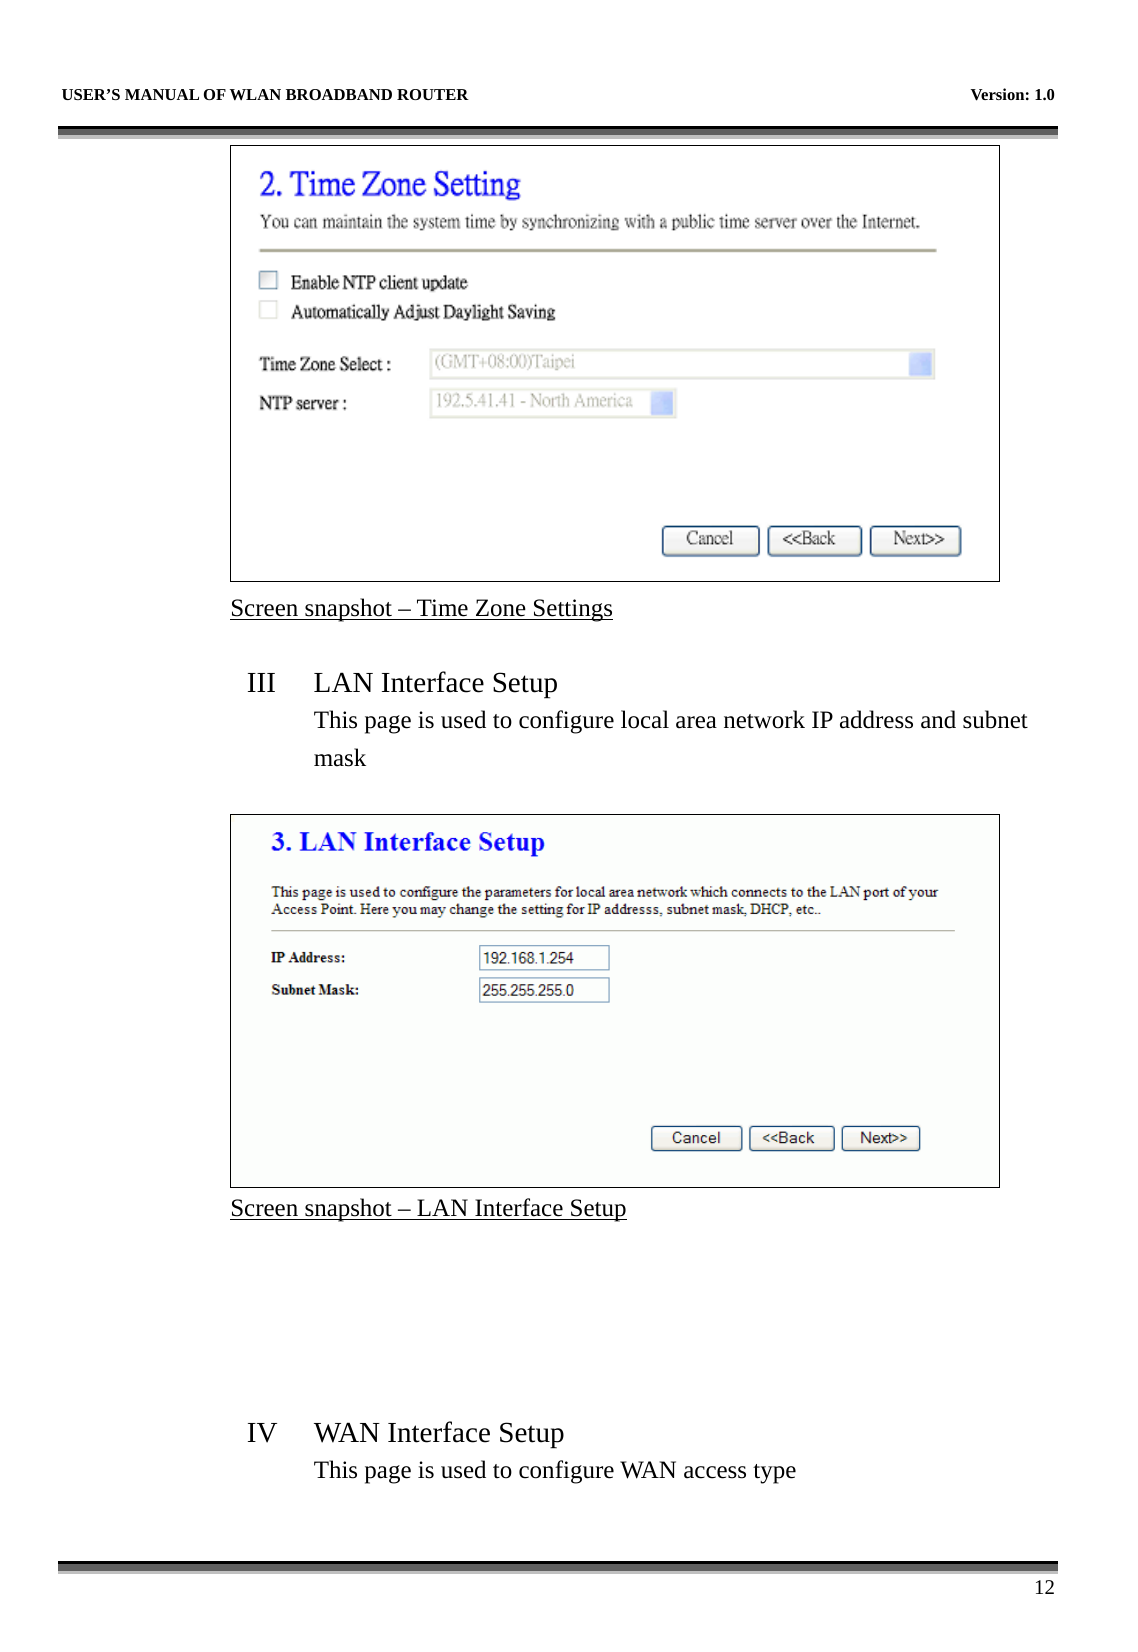   USER’S MANUAL OF WLAN BROADBAND ROUTER    Version: 1.0      12  Screen snapshot – Time Zone Settings  III LAN Interface Setup This page is used to configure local area network IP address and subnet mask   Screen snapshot – LAN Interface Setup      IV WAN Interface Setup This page is used to configure WAN access type  